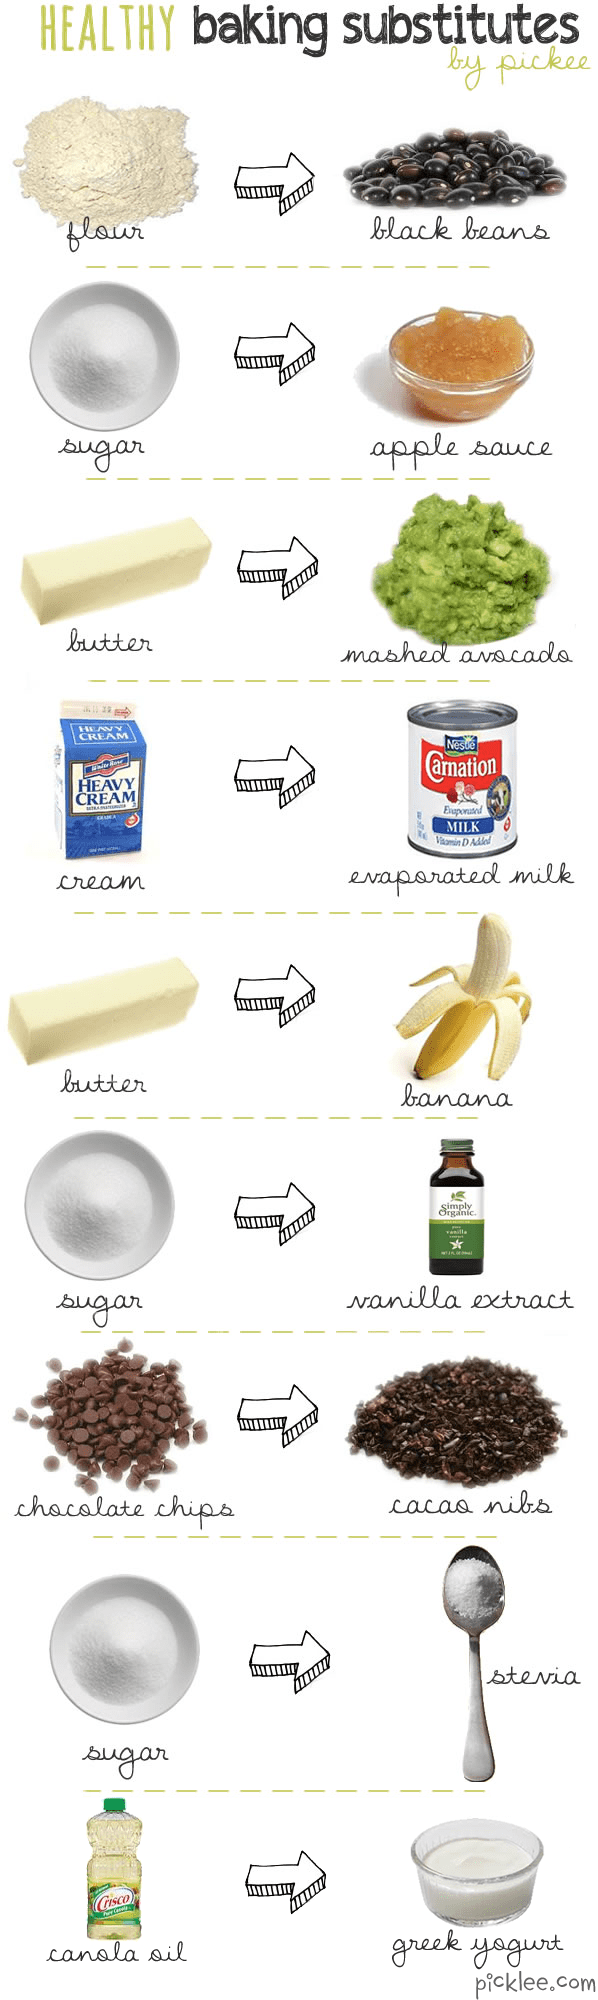 Healthy Baking Substitutions {healthy living} - Picklee